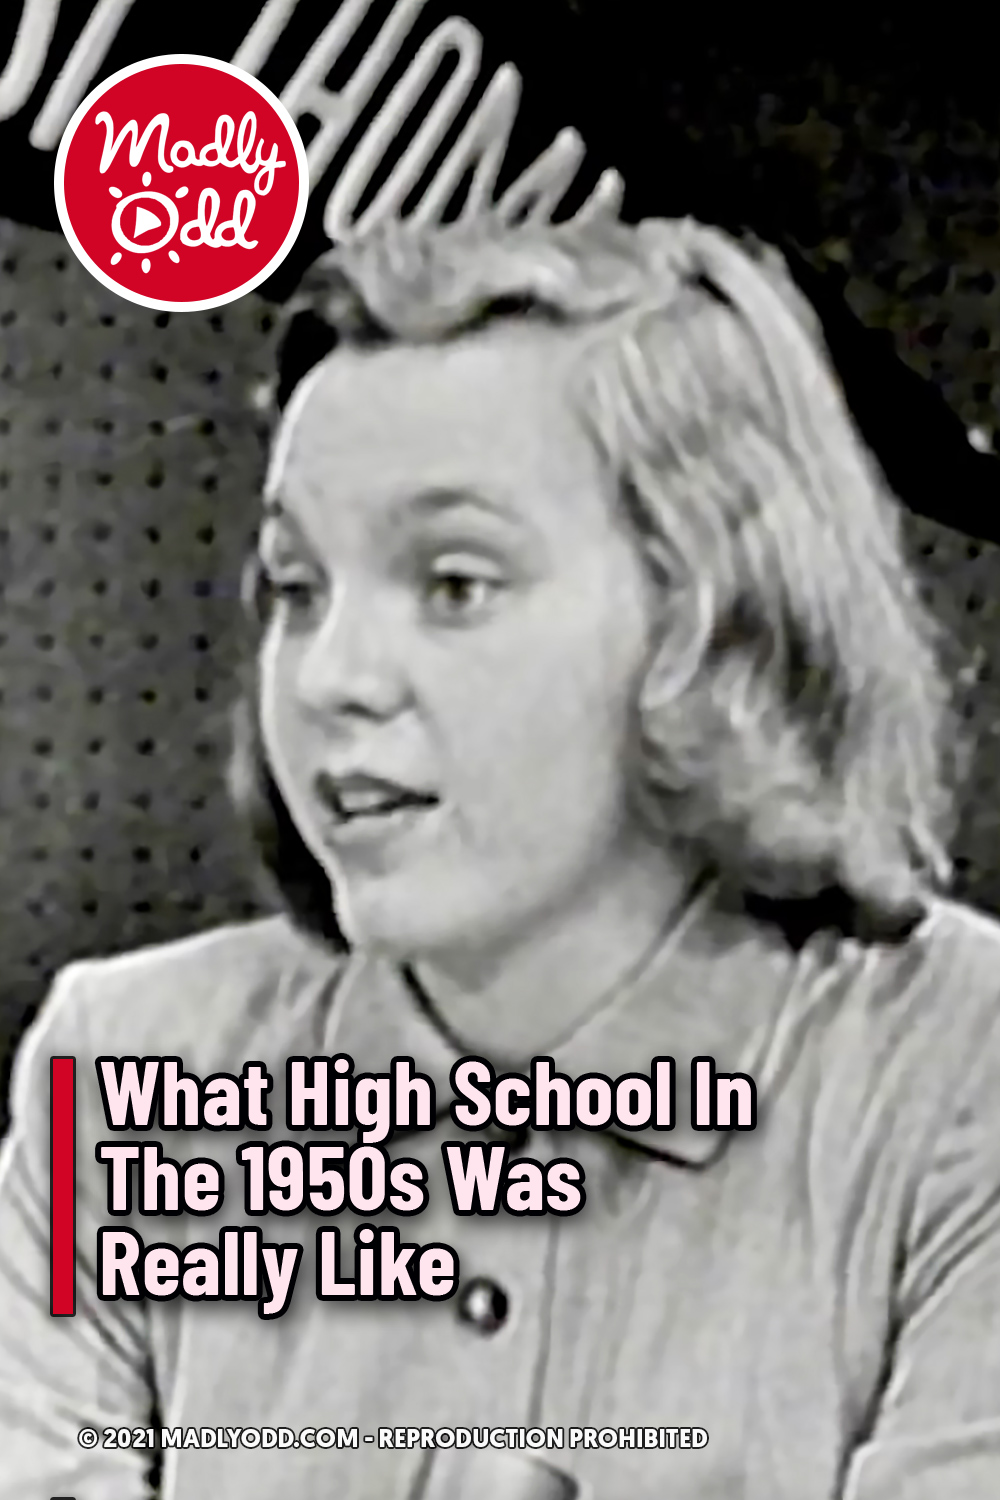 What High School In The 1950s Was Really Like